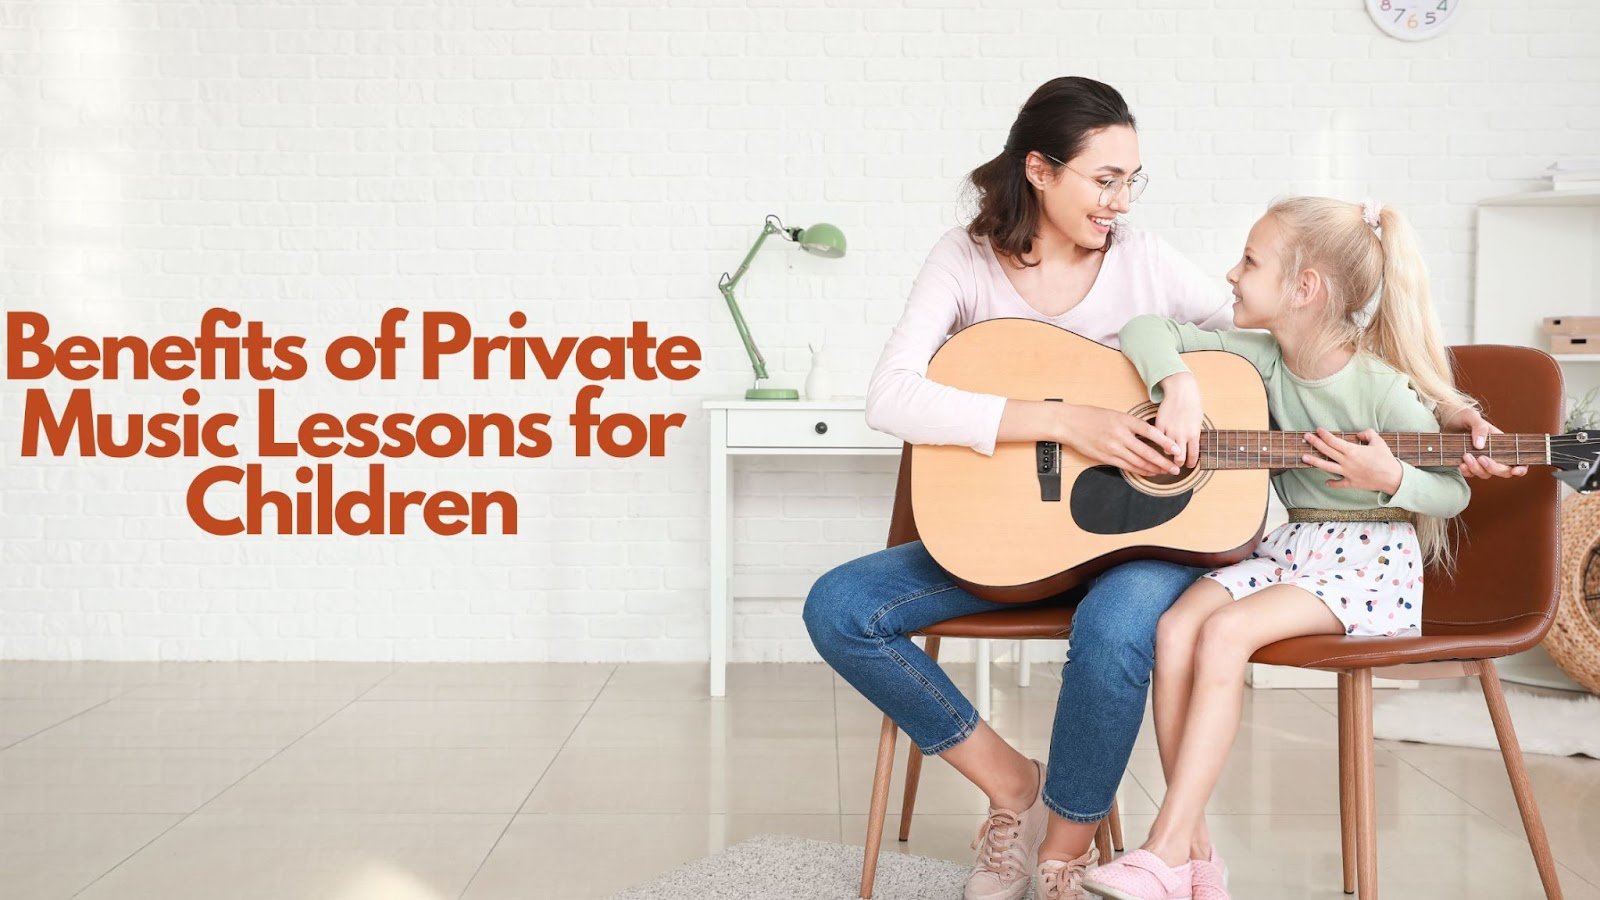 Benefits of Private Music Lessons for Children